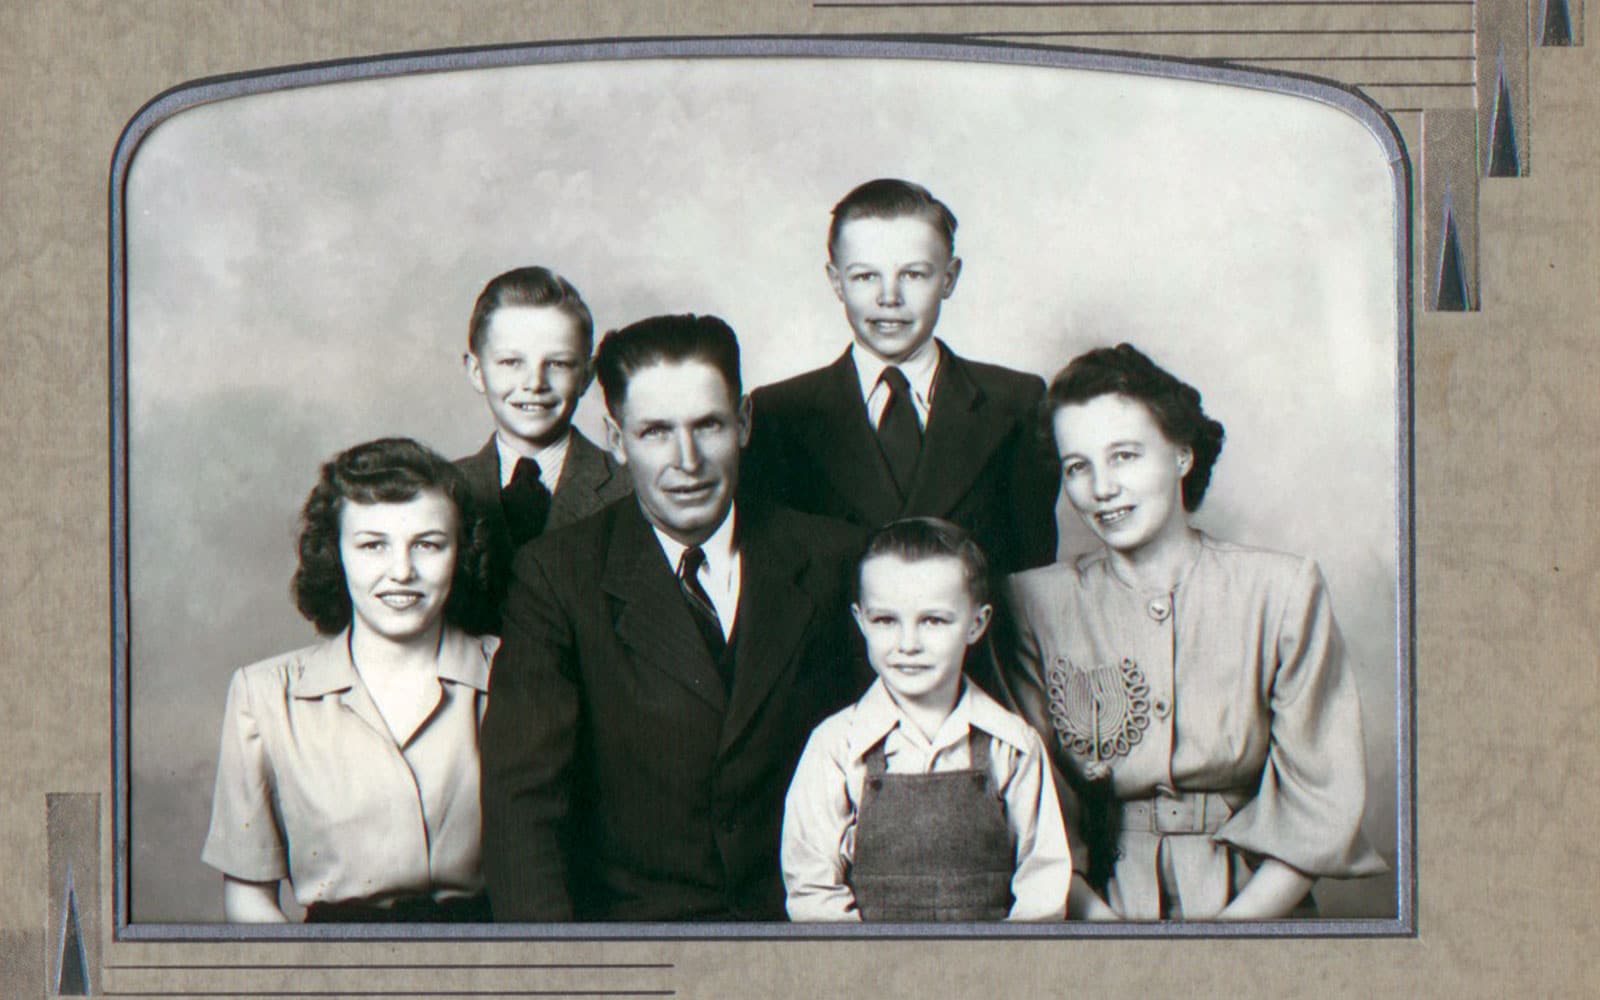 Edward and Mary Christensen with their four children